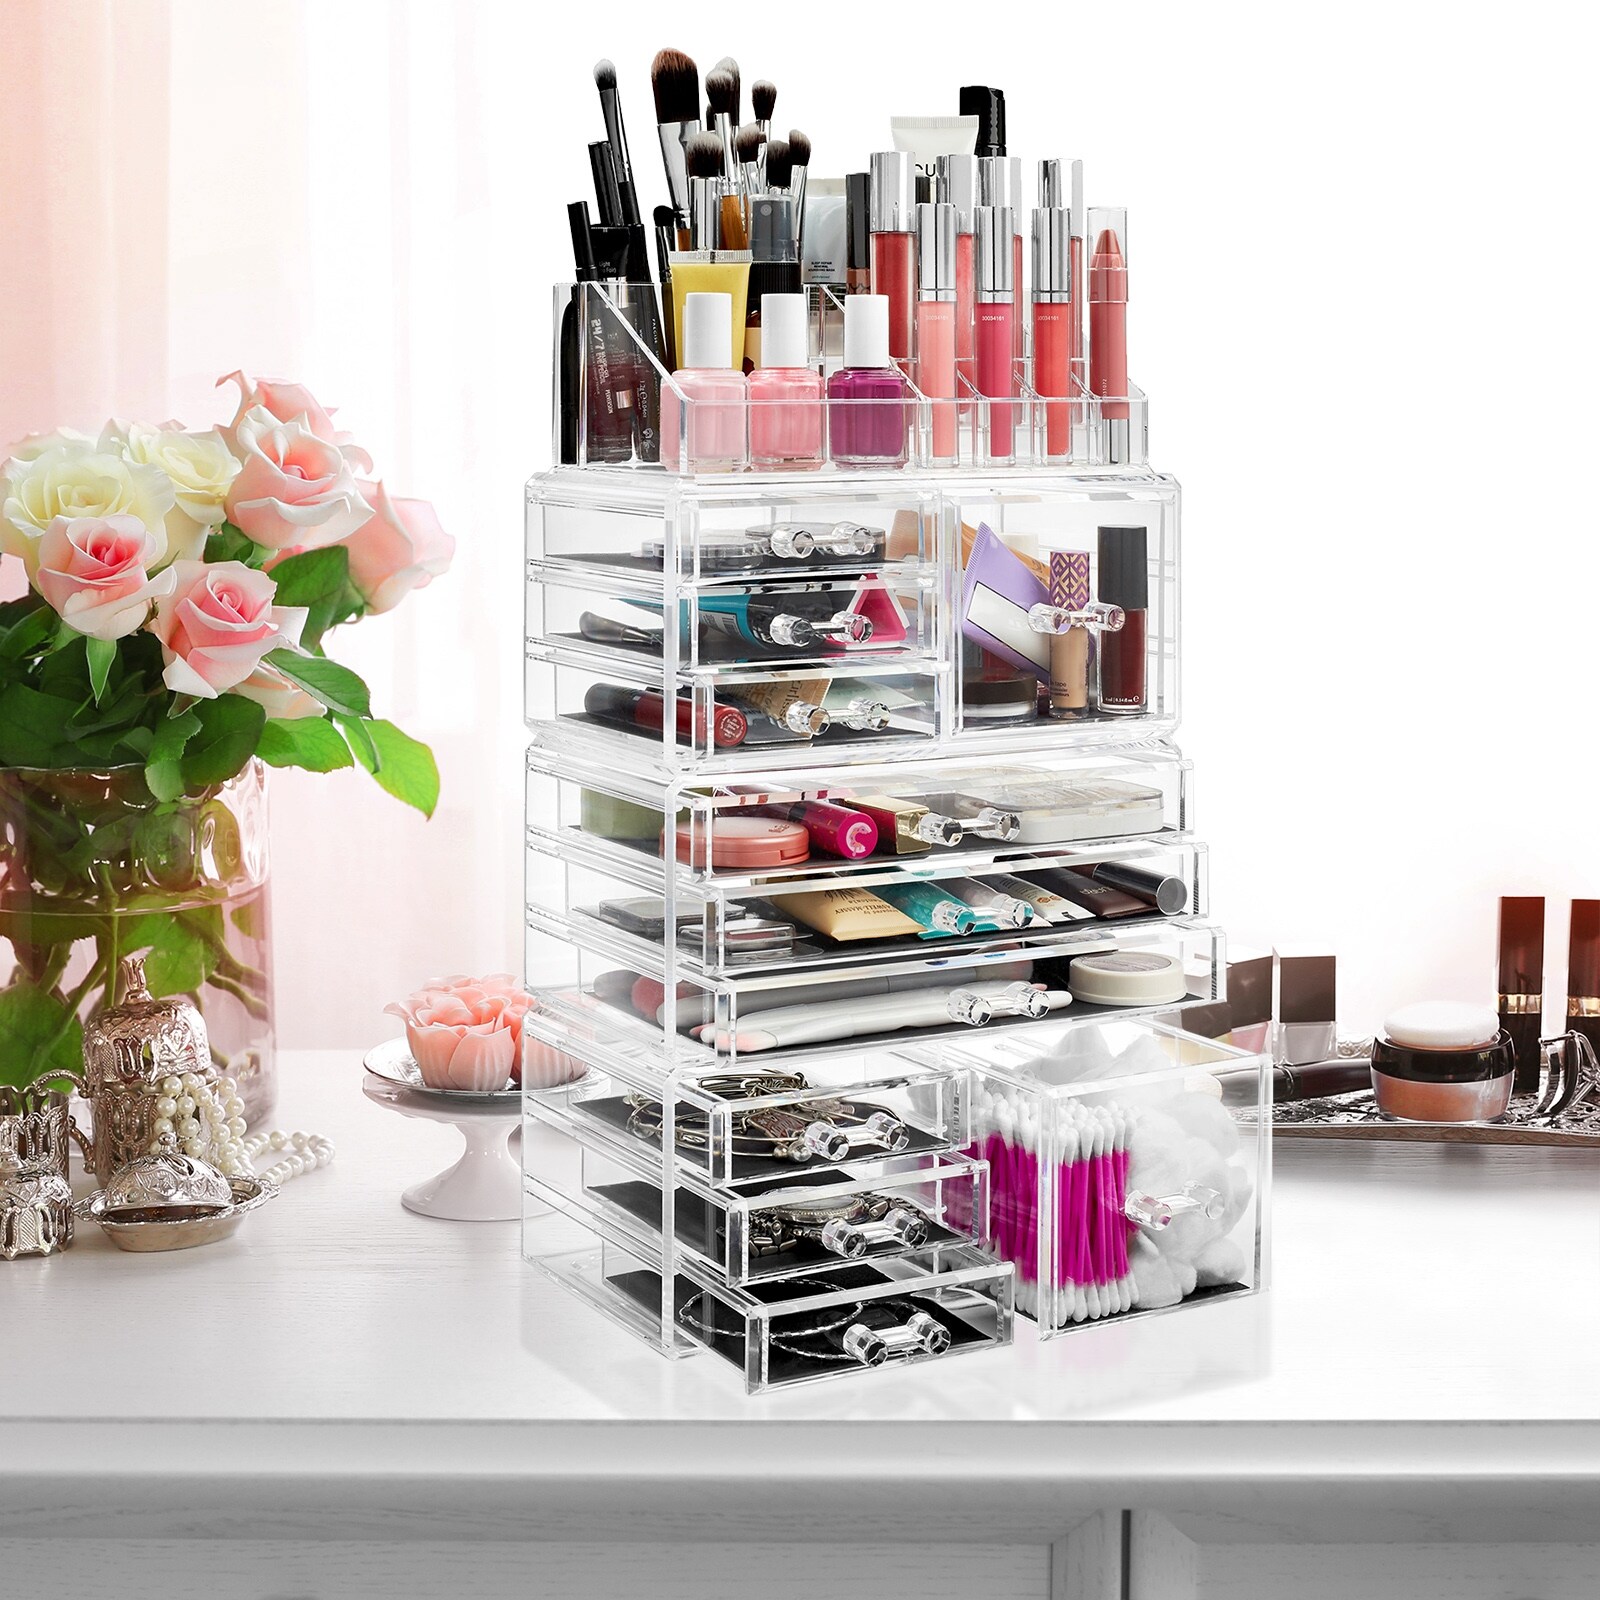 https://ak1.ostkcdn.com/images/products/is/images/direct/40078456c7a05d324d215f4ec6859d7033b688d4/Large-Acrylic-Cosmetic-Makeup-Organizer-Jewelry-Drawer-Storage-Box-Display-Case.jpg